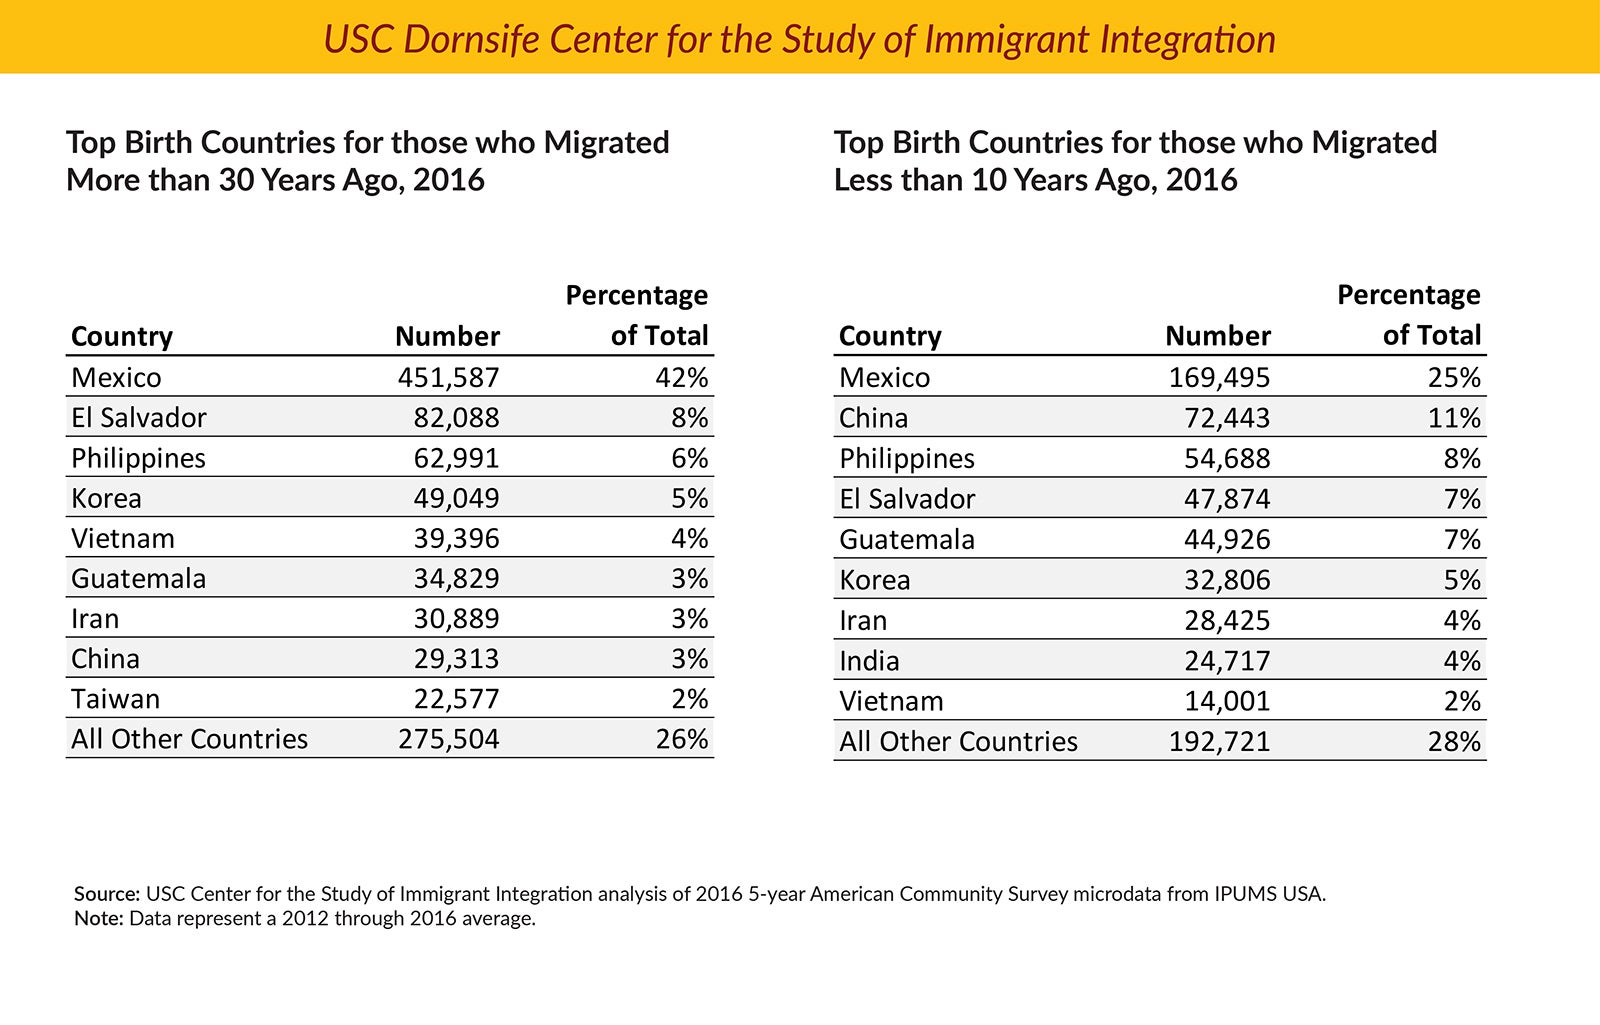 Table comparing origins of immigrants 30 years ago vs 10 years ago